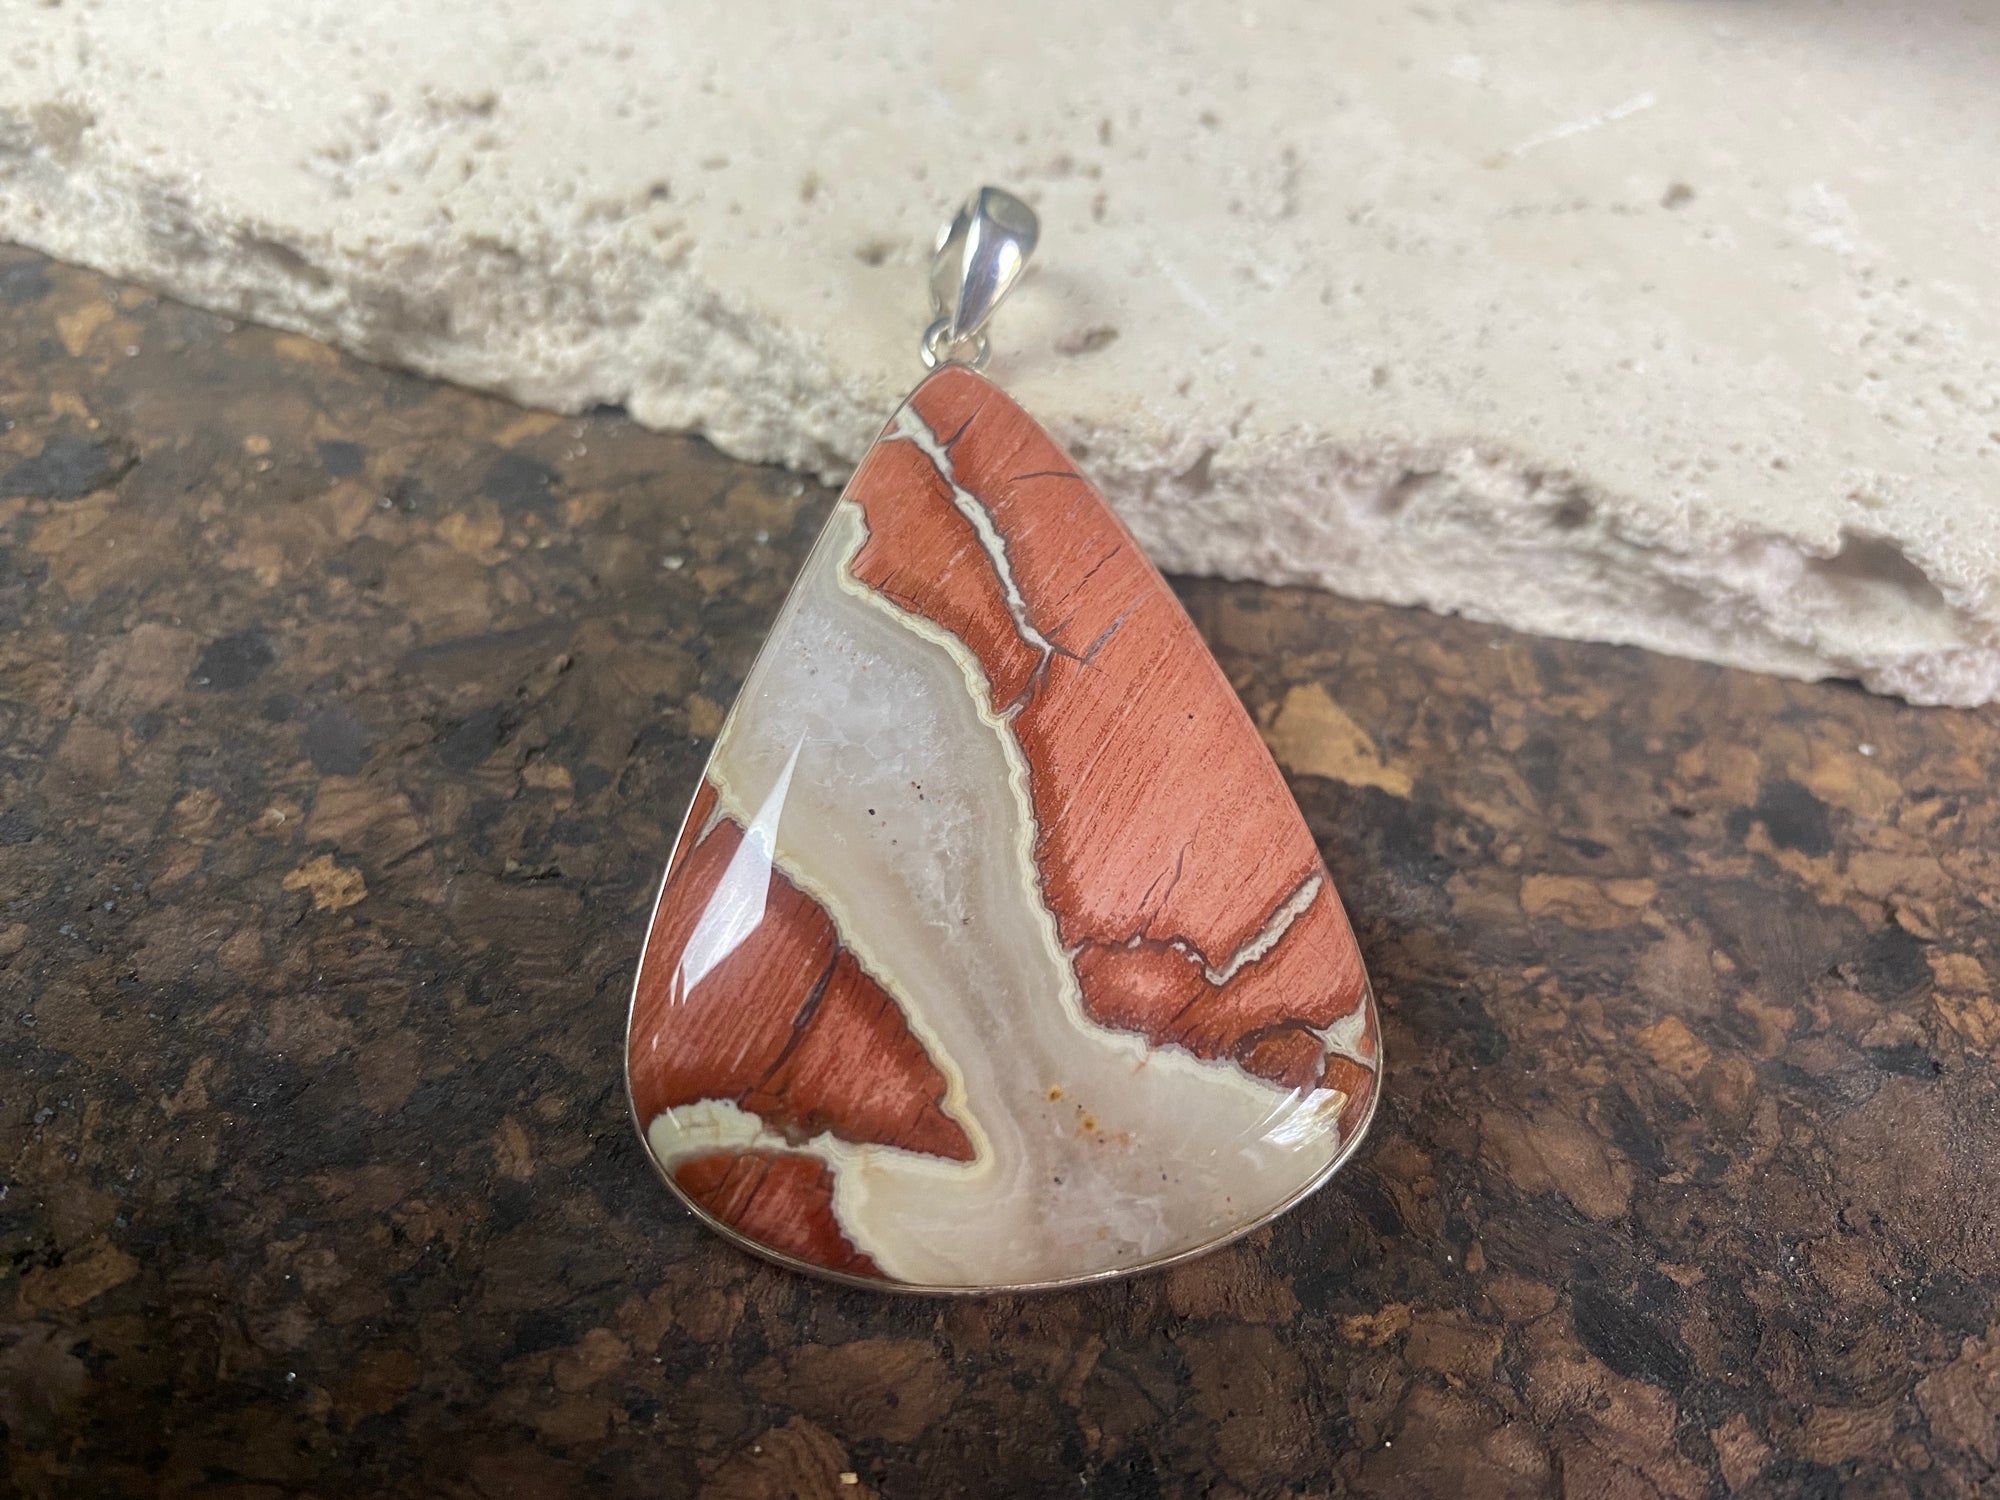 A unique pendant carved from a single piece of jasper intertwined with moonstone. A sterling silver bezel and generous bail completes this statement pendant. Open at the back to allow the stone to touch the skin. Measurements: height 6.8 cm including bail (2.75"), width 4 cm at widest point